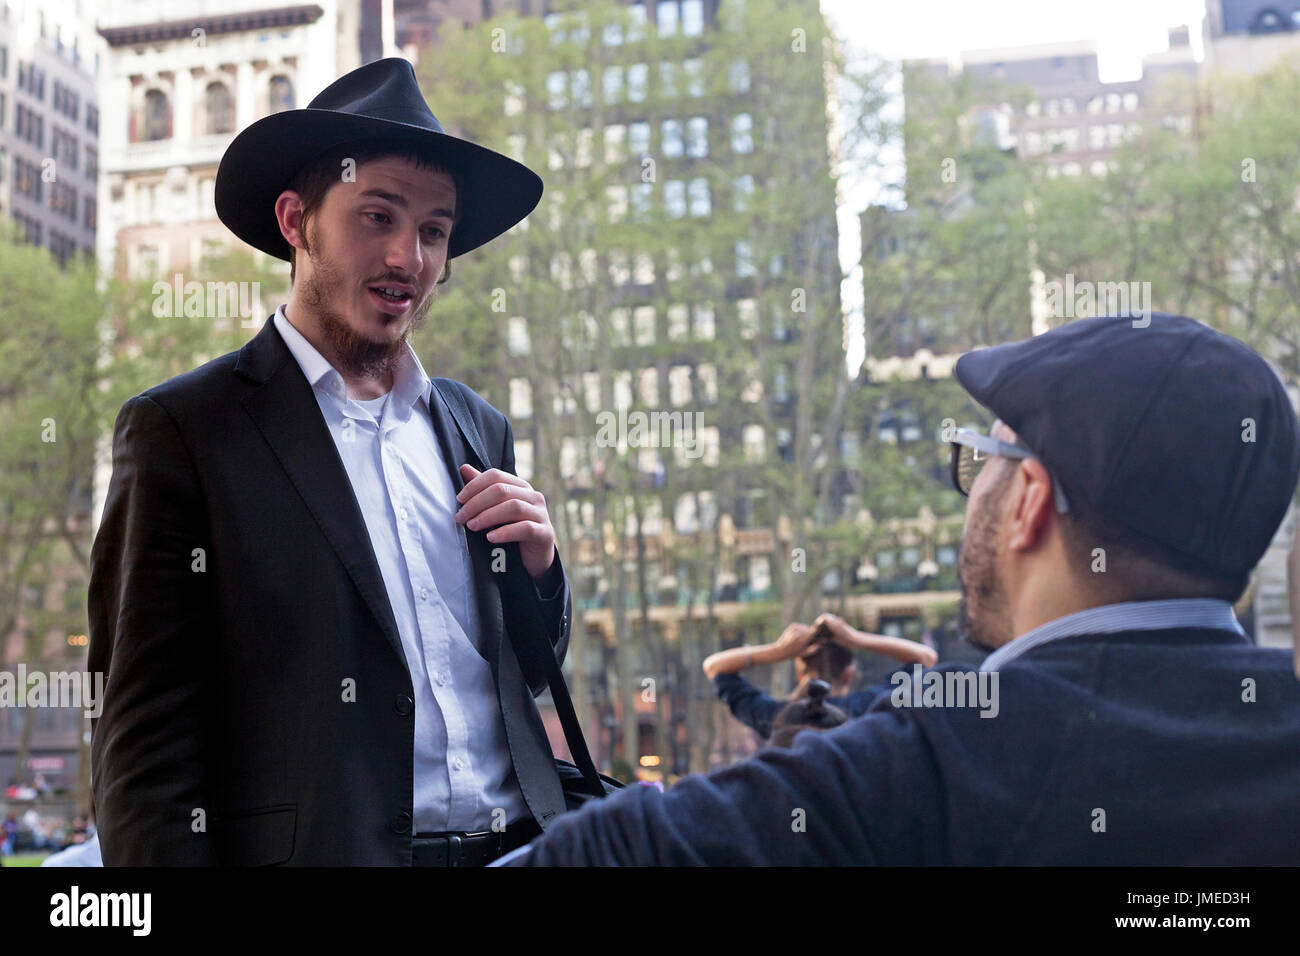 A young Orthodox Jewish man speaks to someone in Bryant Park in New York City. Stock Photo